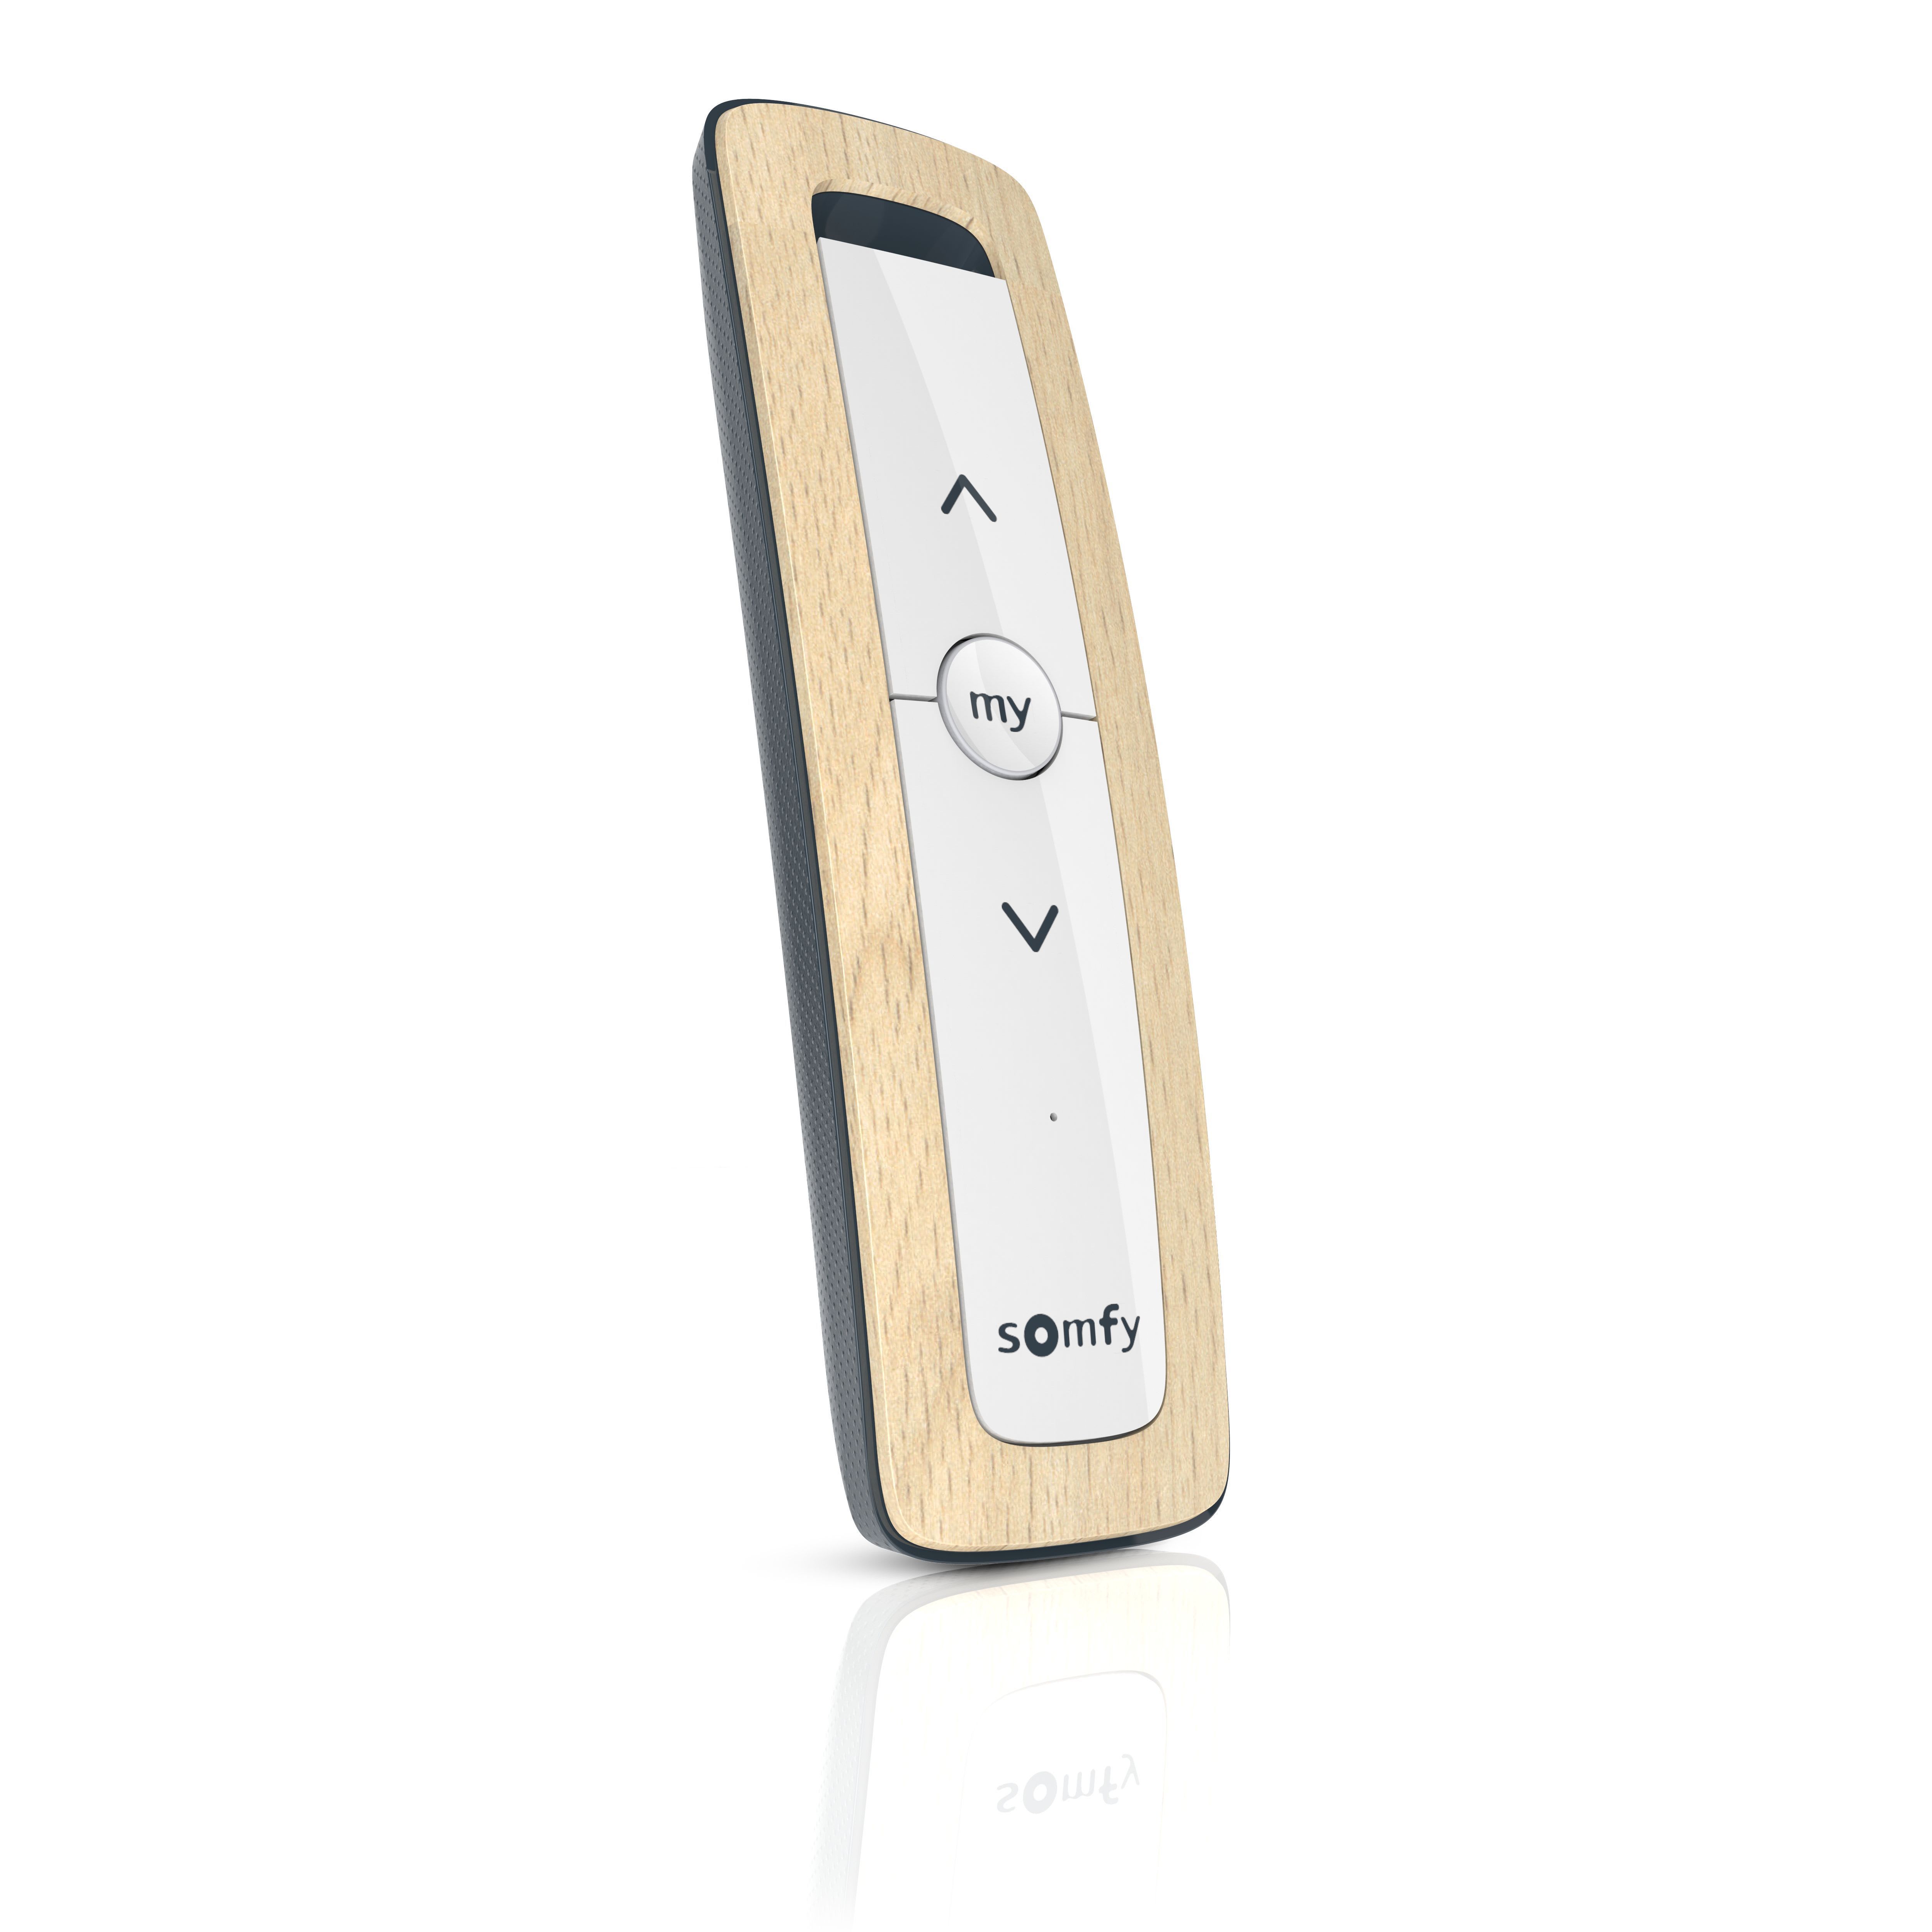 Somfy - Telecommande situo 1 rts natural ii pour automatisme rts